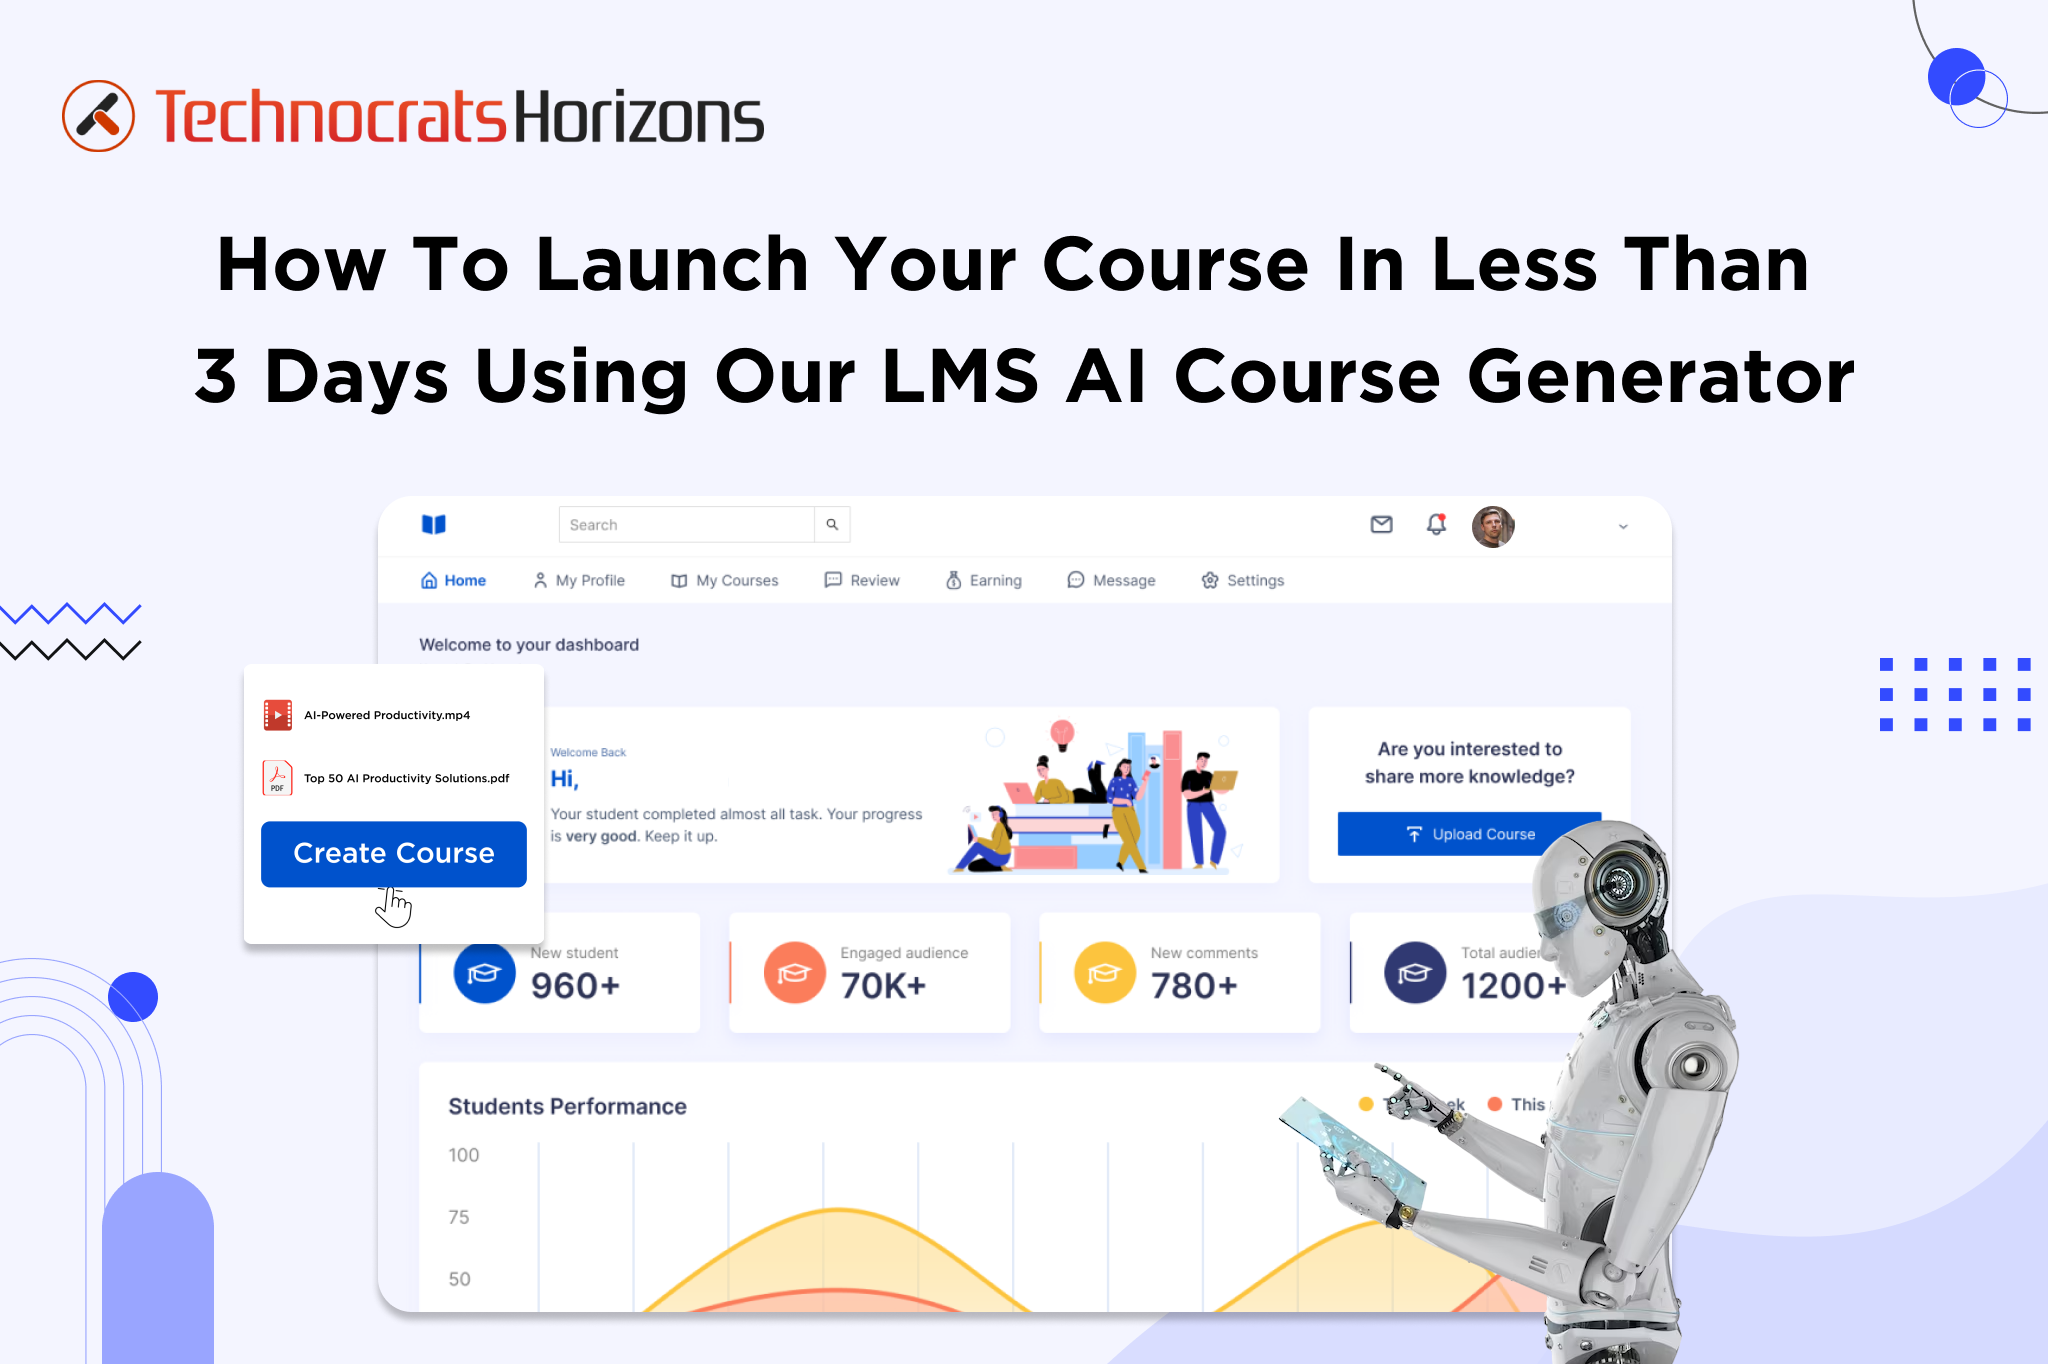 How To Launch Your Course in No Time Using Our LMS AI Course Generator